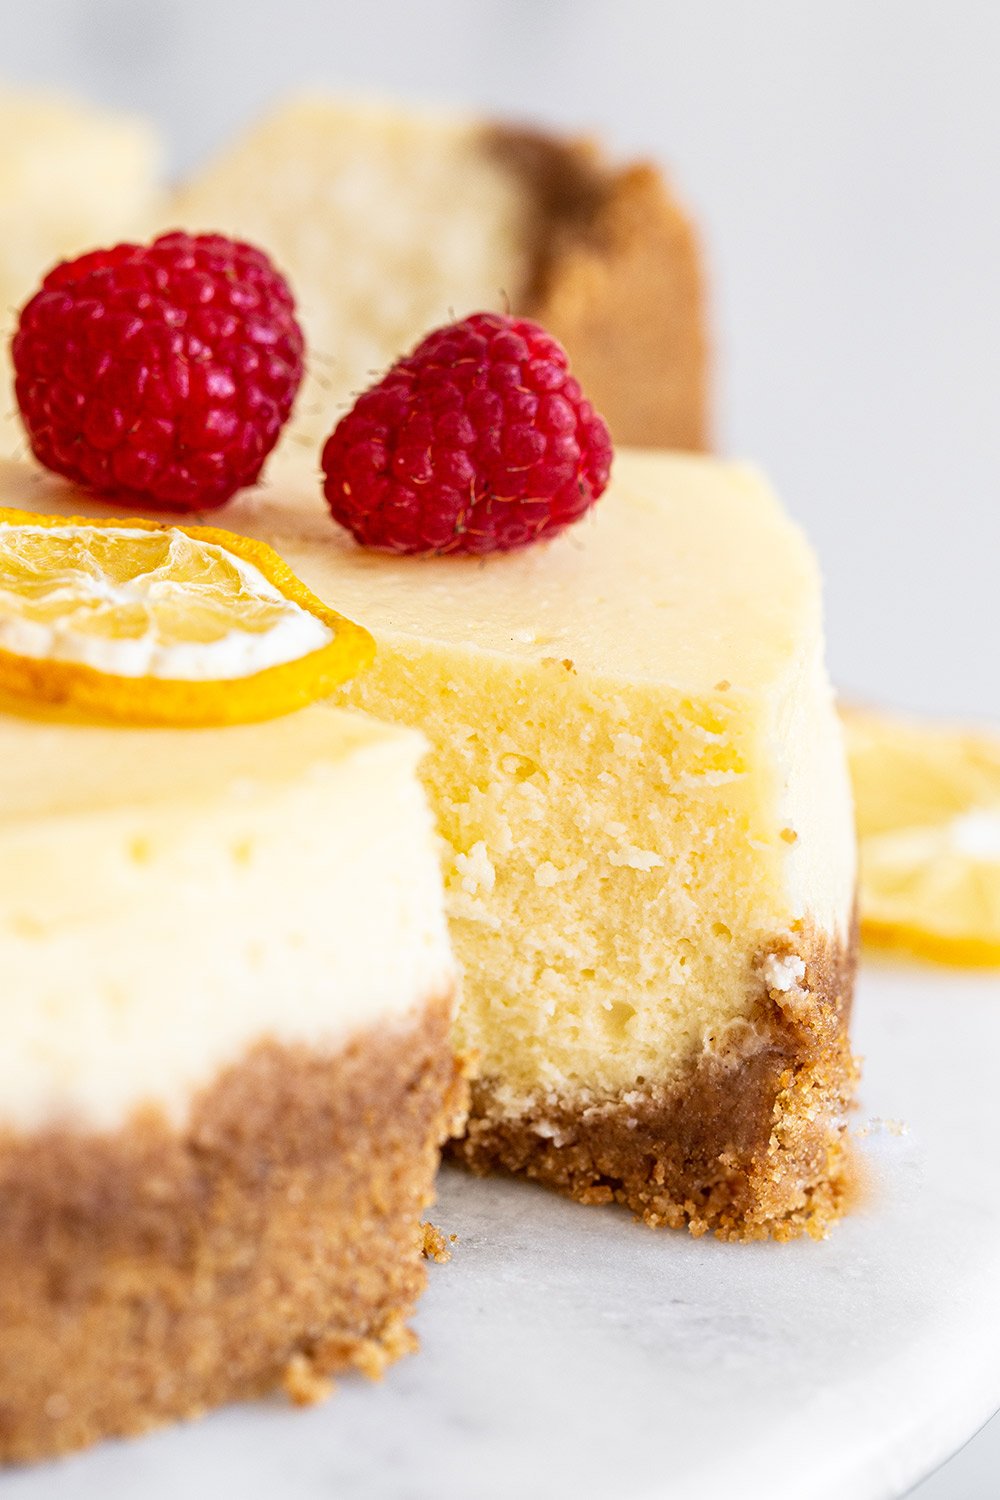 slice of rich classic cheesecake with fruit garnished on top